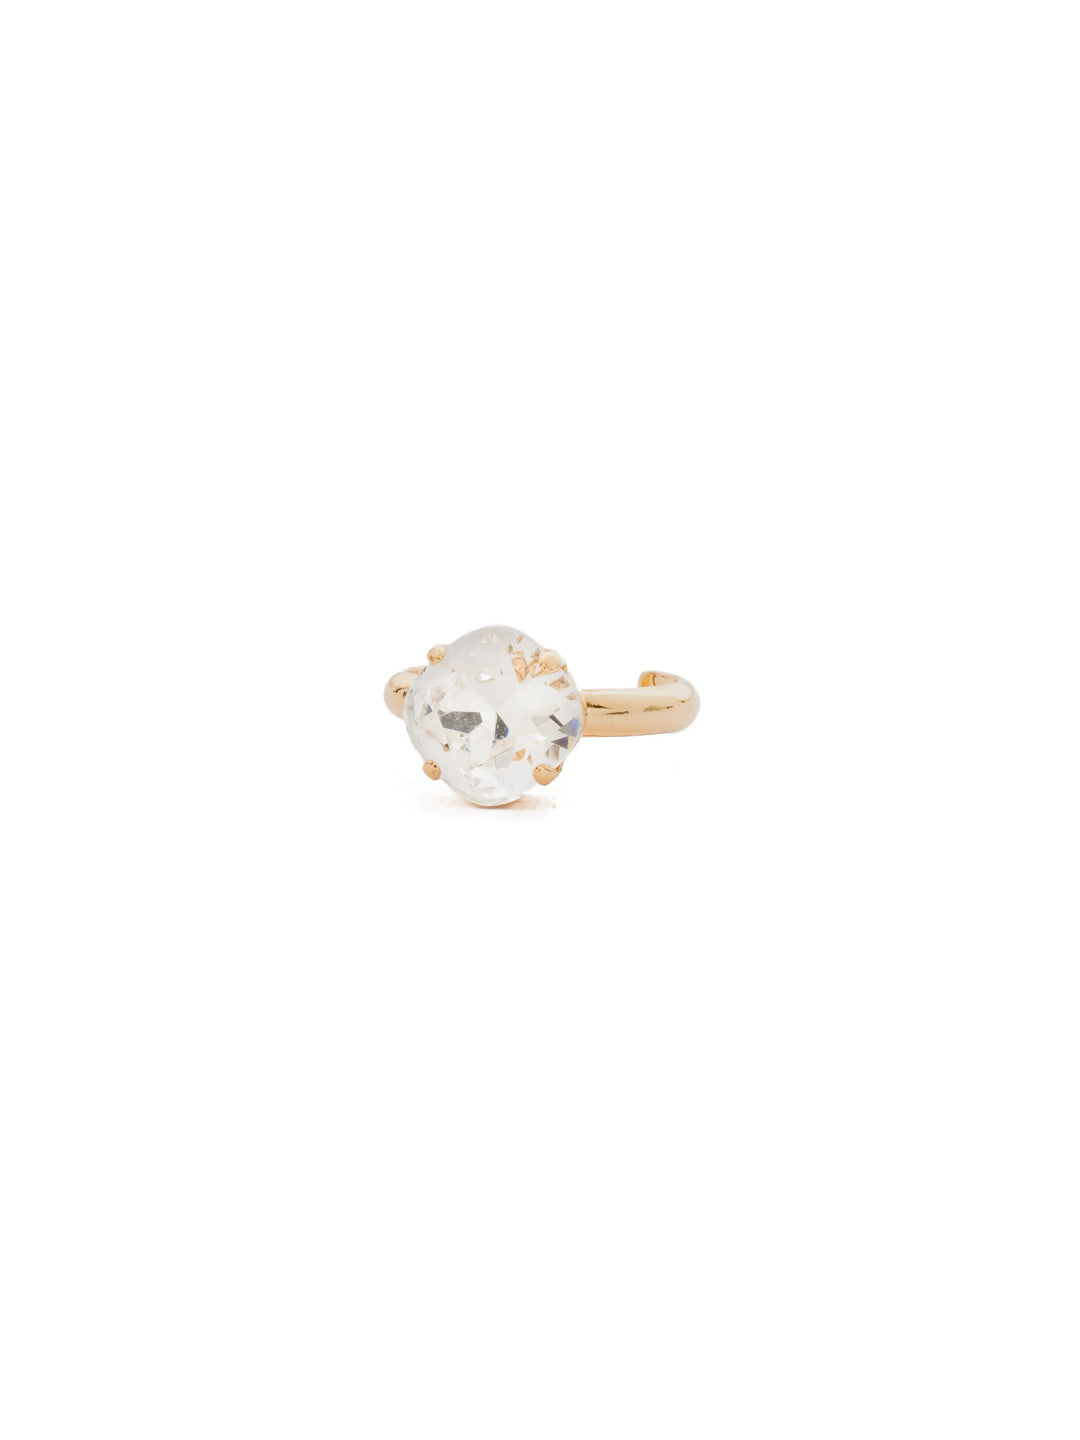 One and Only Band Ring - RDN30BGCRY - <p>The one and only style you need for your favorite everyday look! A delicate and classic four-pronged setting highlights the beautiful cut of this cushion-cut crystal. From Sorrelli's Crystal collection in our Bright Gold-tone finish.</p>